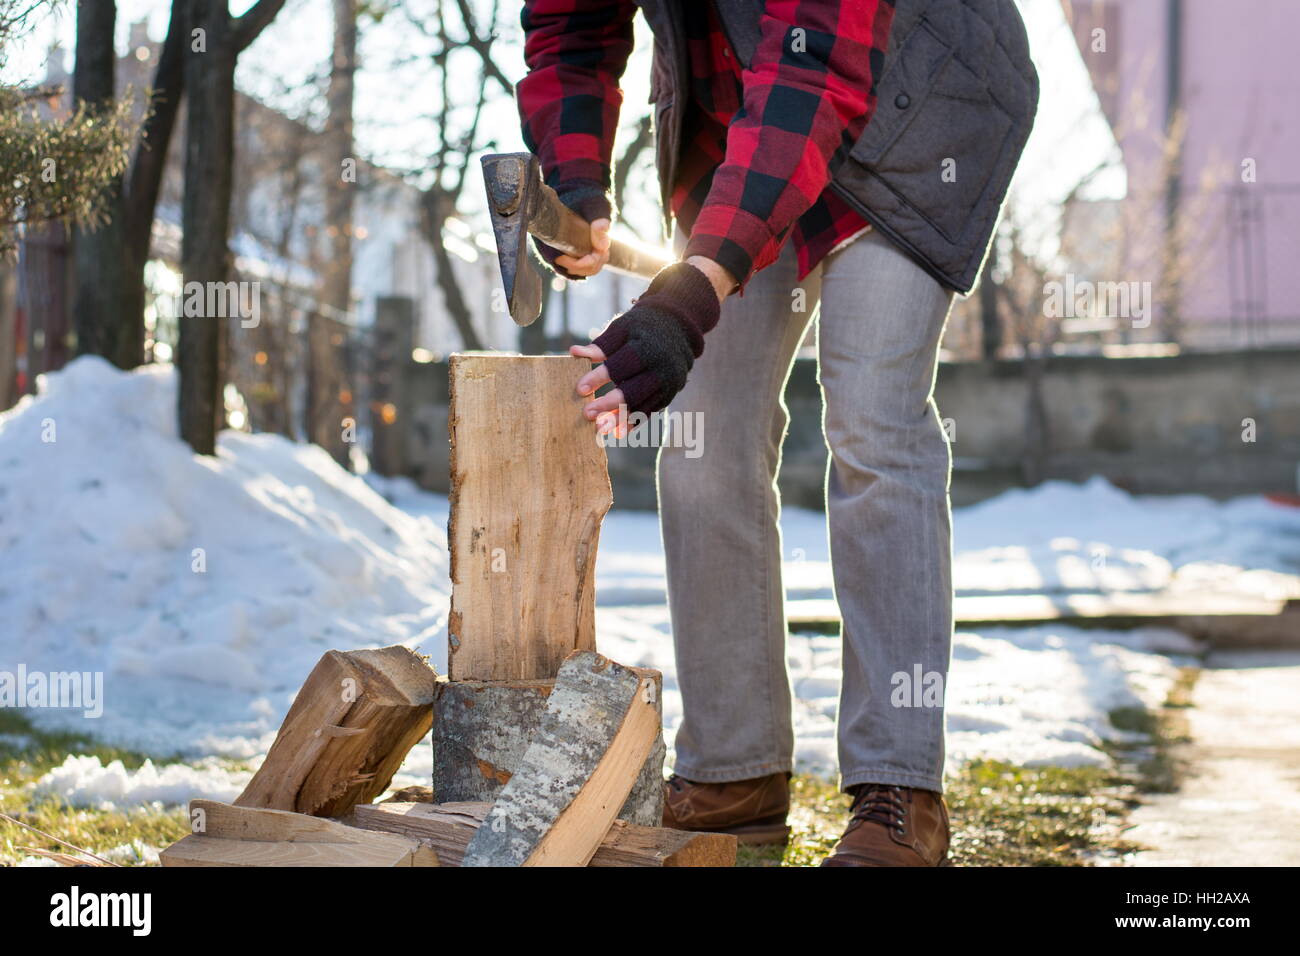 Man chopping firewood in the front yard Stock Photo